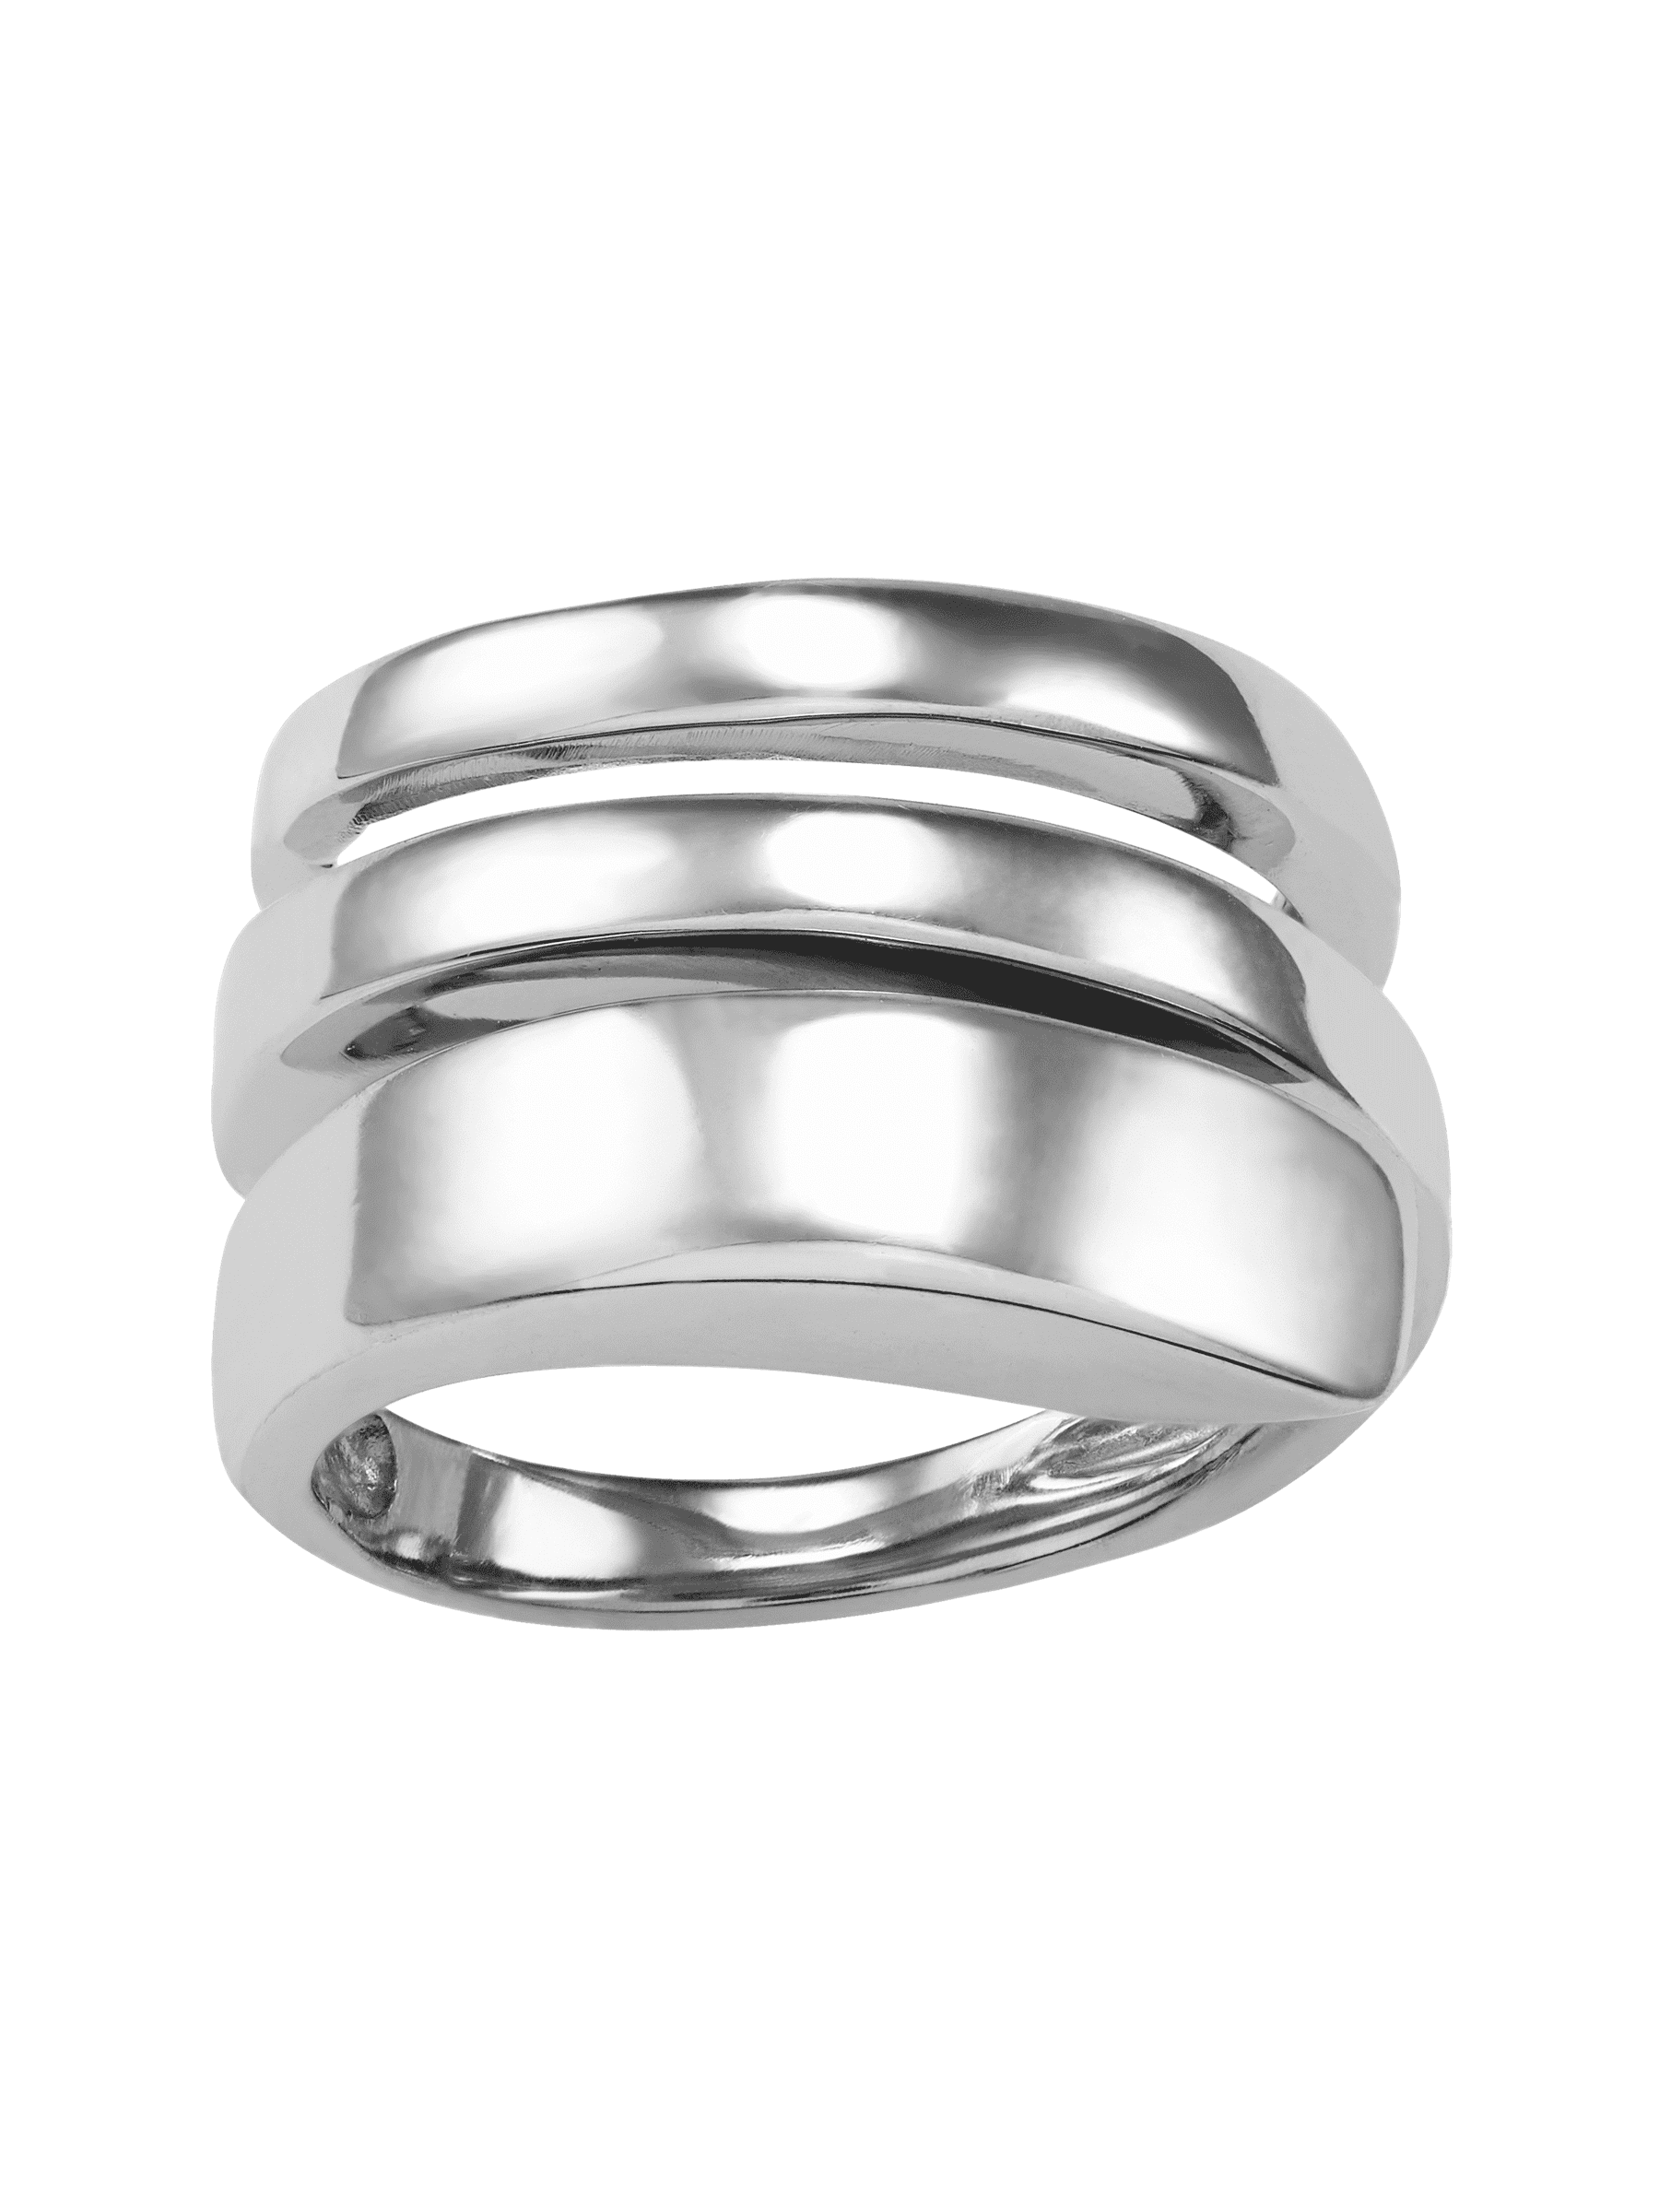 Rathburn Ring Stretcher – 5.75 Inches Multi-Stepped Mandrel – Stretches  Rings Size 6 and Up – Sizing Tool to Adjust Wedding Bands and Other Finger  Rings 